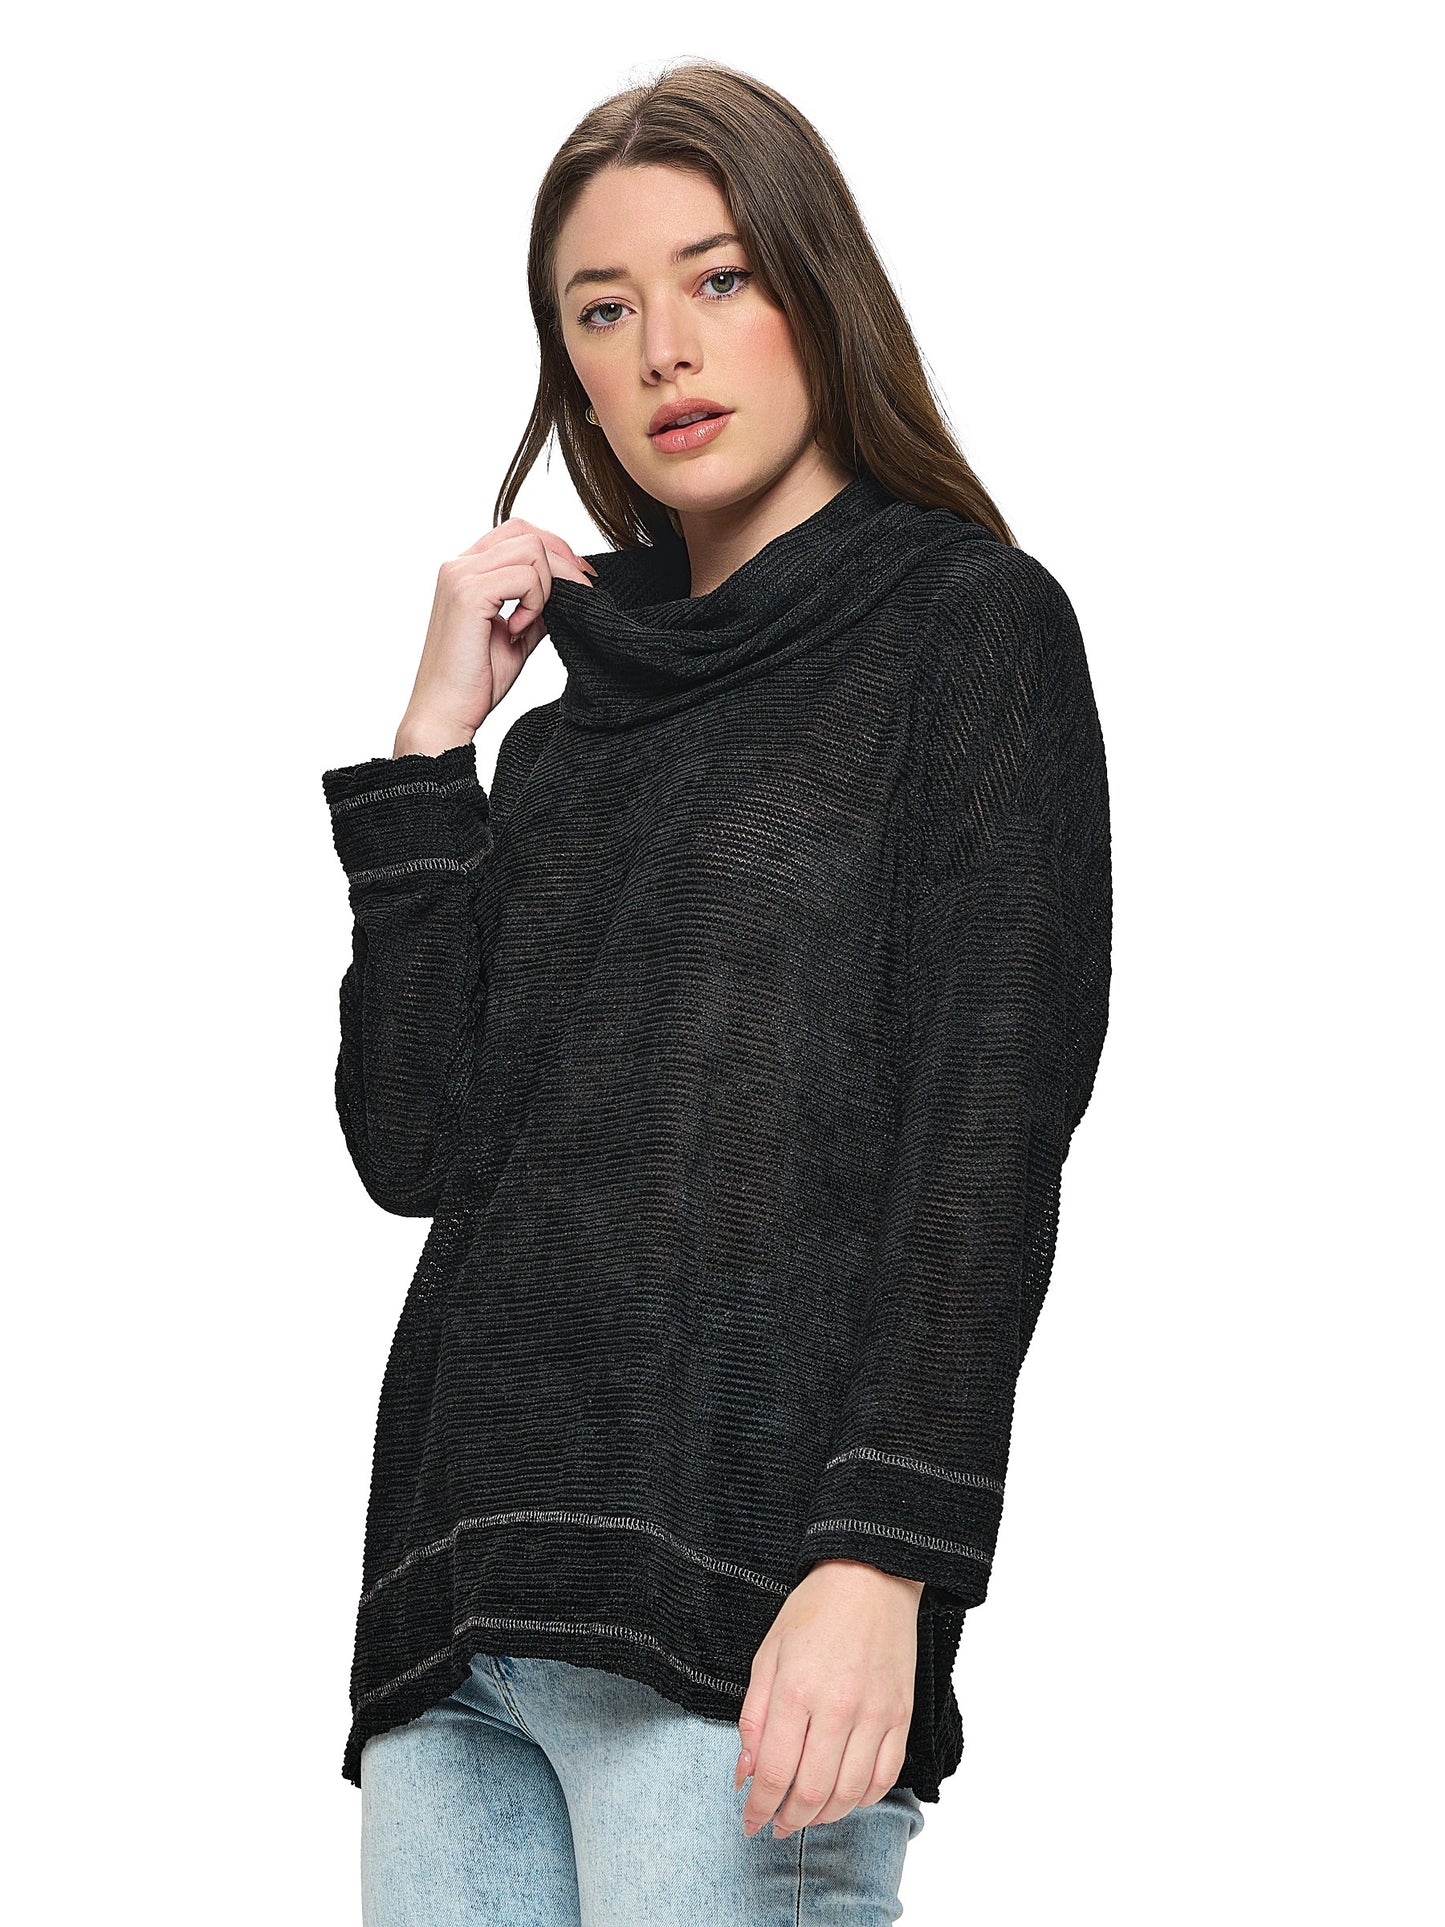 Sweater Top Slouchy Oversized Cowl Neck